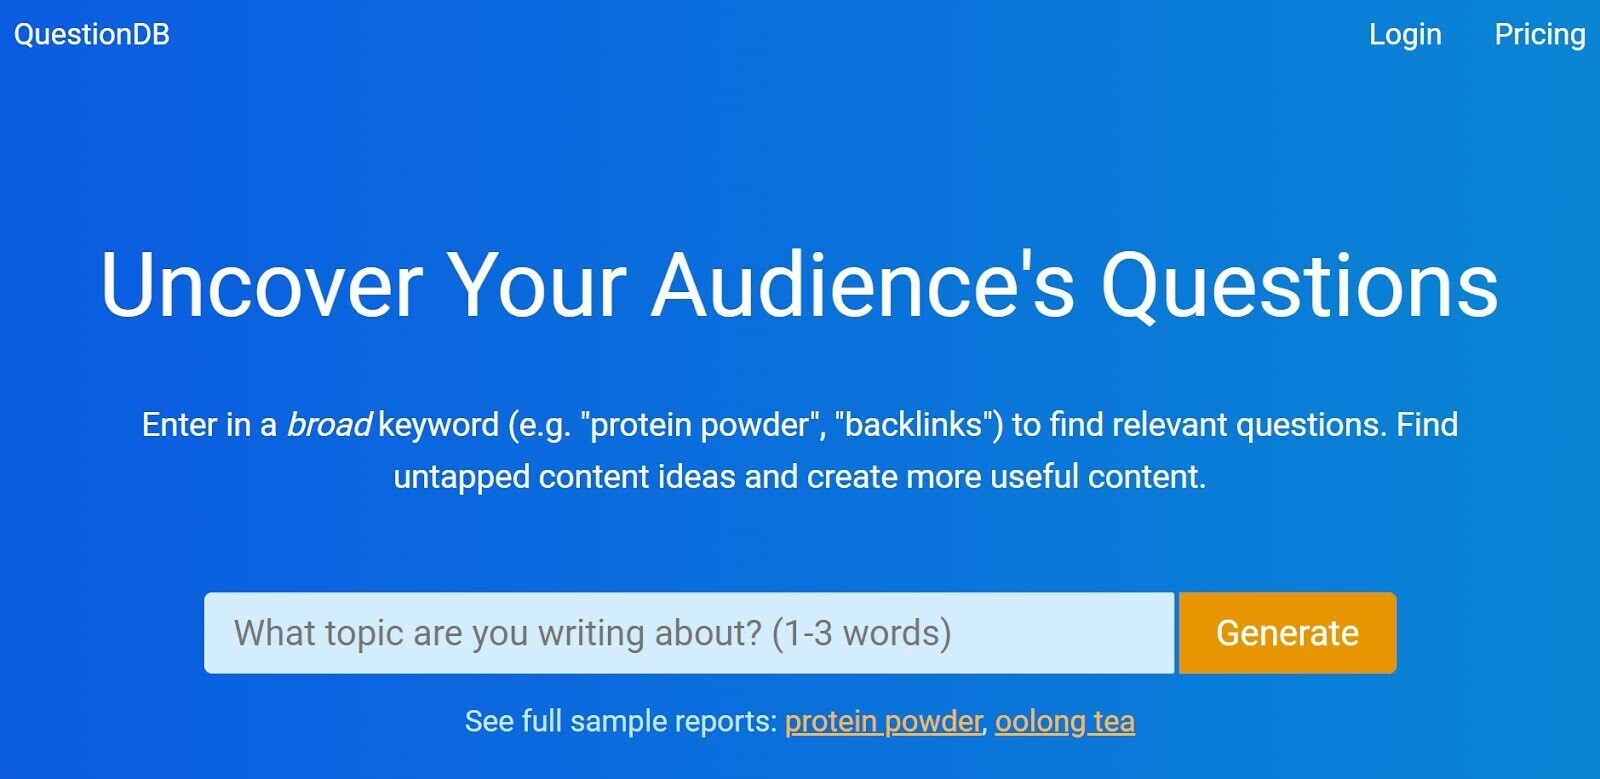 QuestionDB 主页标题为“Uncover Your Audience’s Questions”